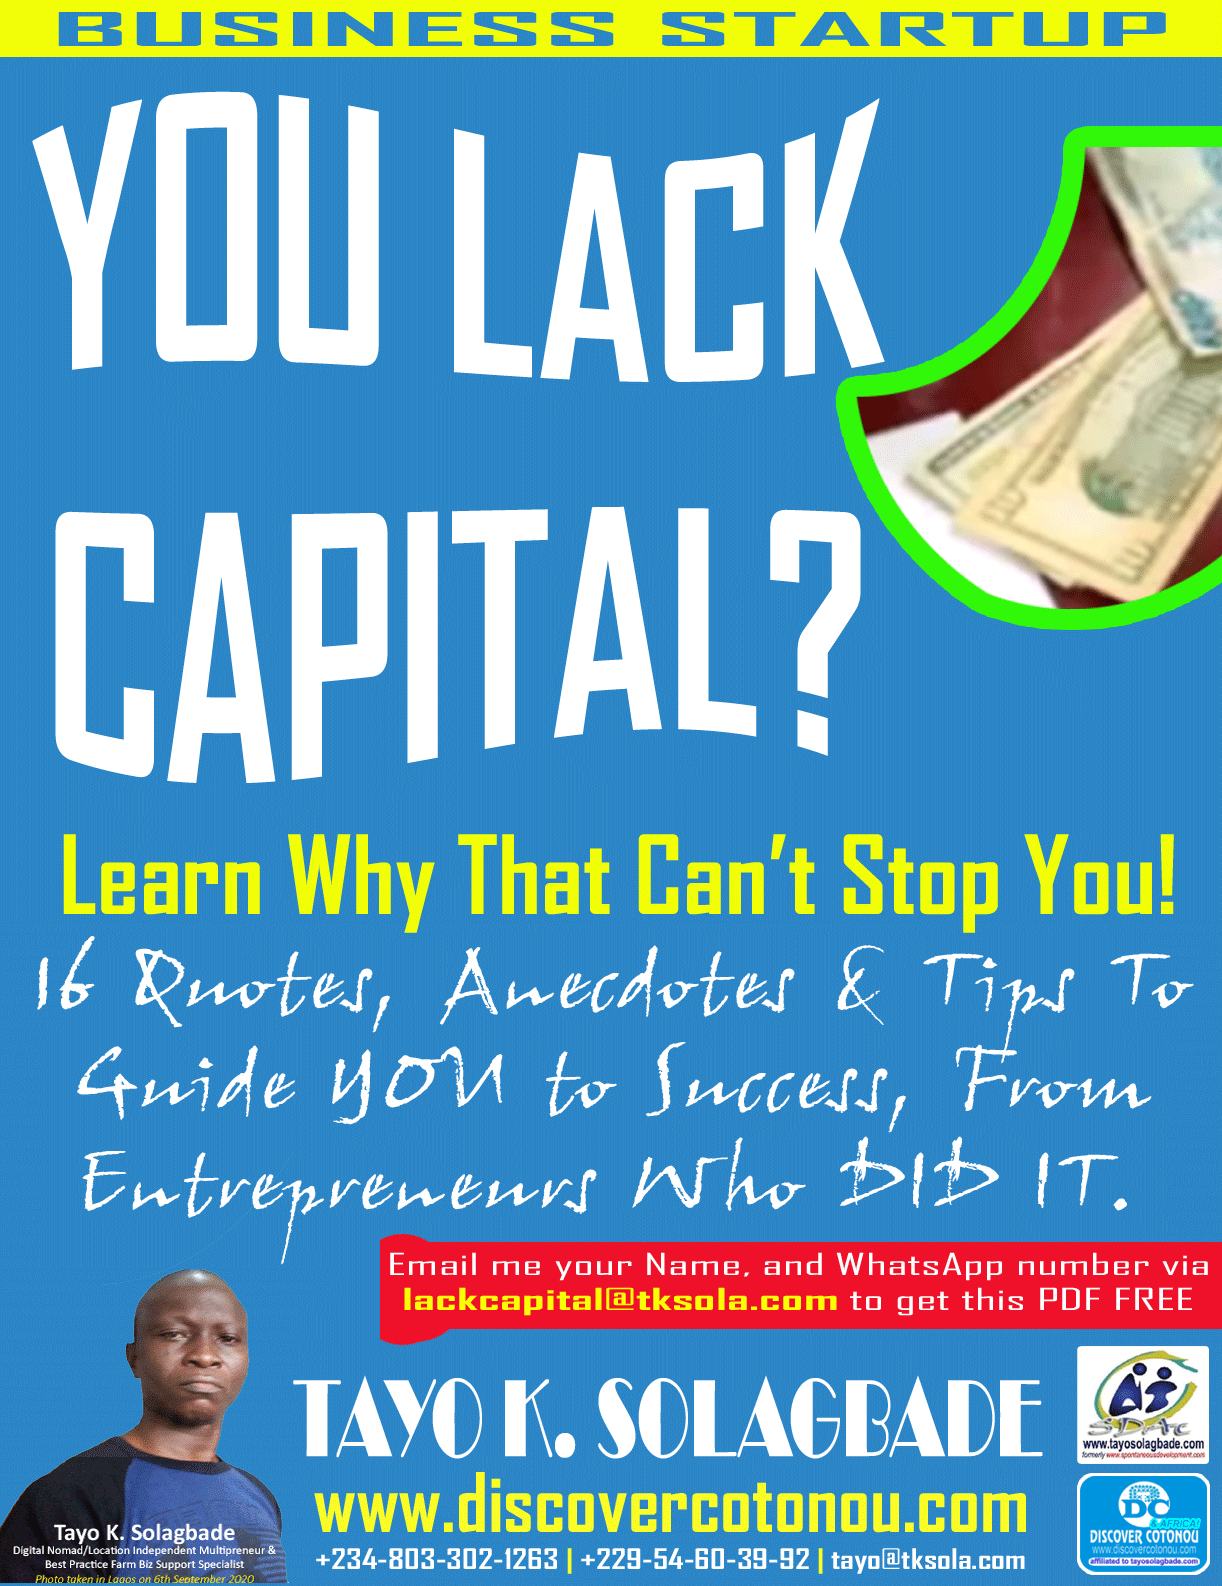 Email me your Name, and WhatsApp number via lackcapital@tksola.com to get this PDF FREE.